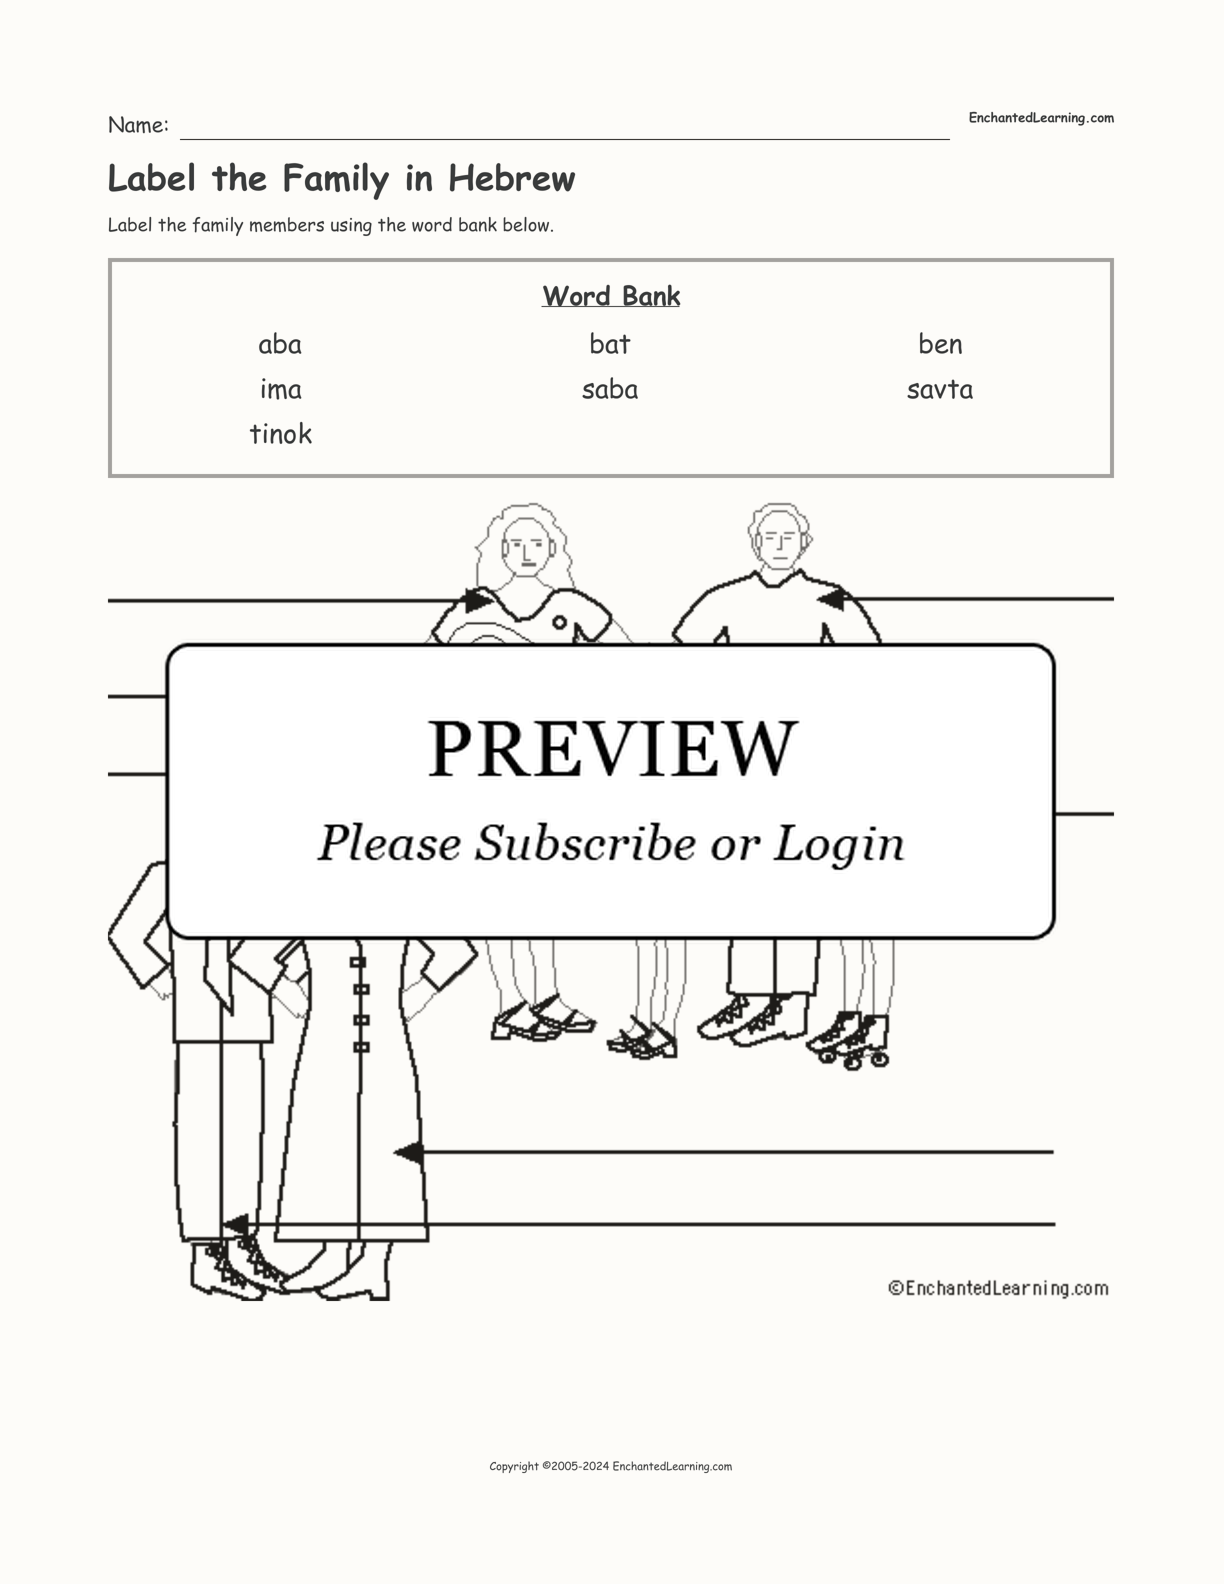 Label the Family in Hebrew interactive worksheet page 1